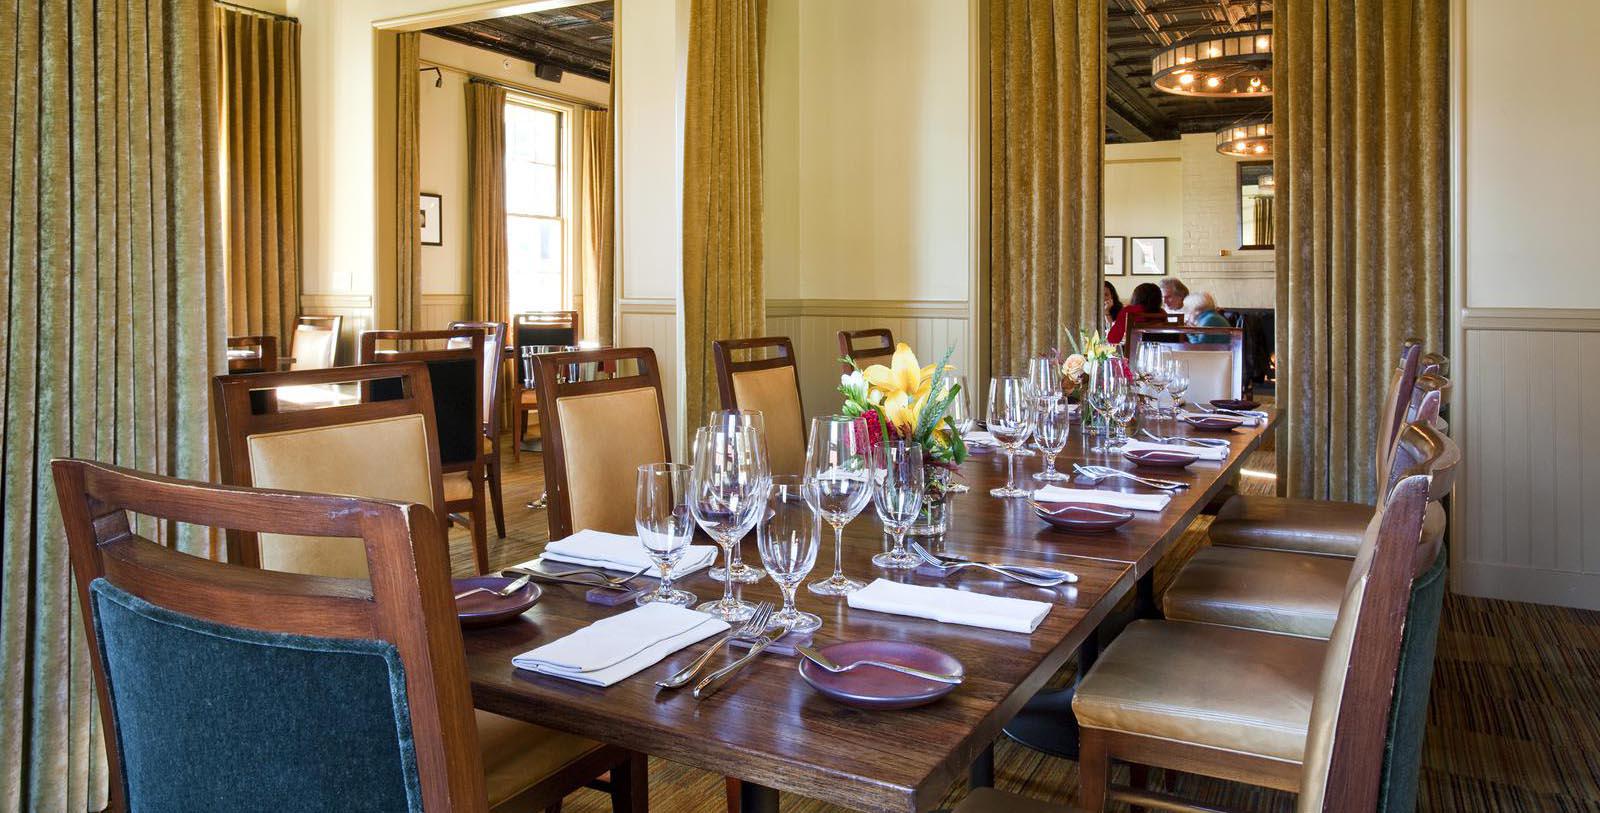 Taste refined Northern California cuisine at Murray Circle, the signature restaurant of Cavallo Point, and enjoy your meal in the elegant dining room or out on the historic porch.